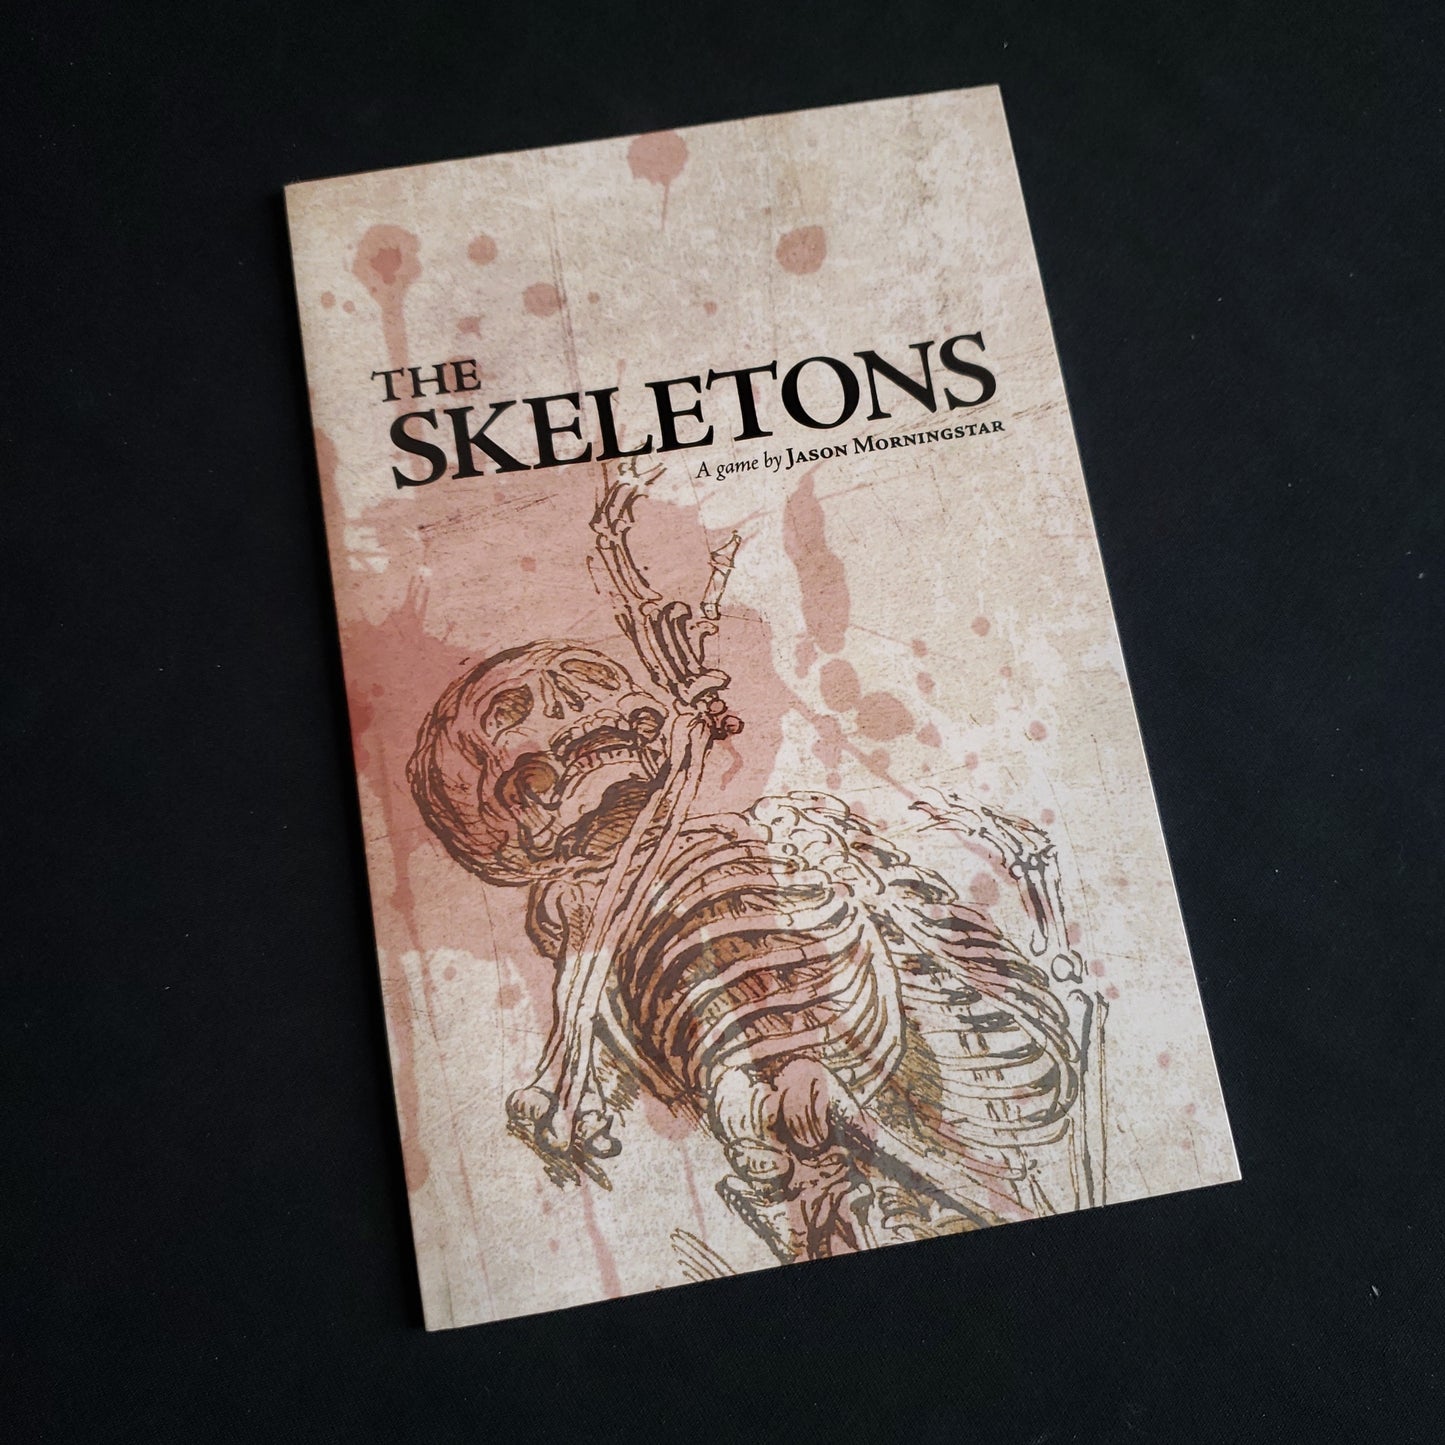 Image shows the front cover of the Skeletons roleplaying game book